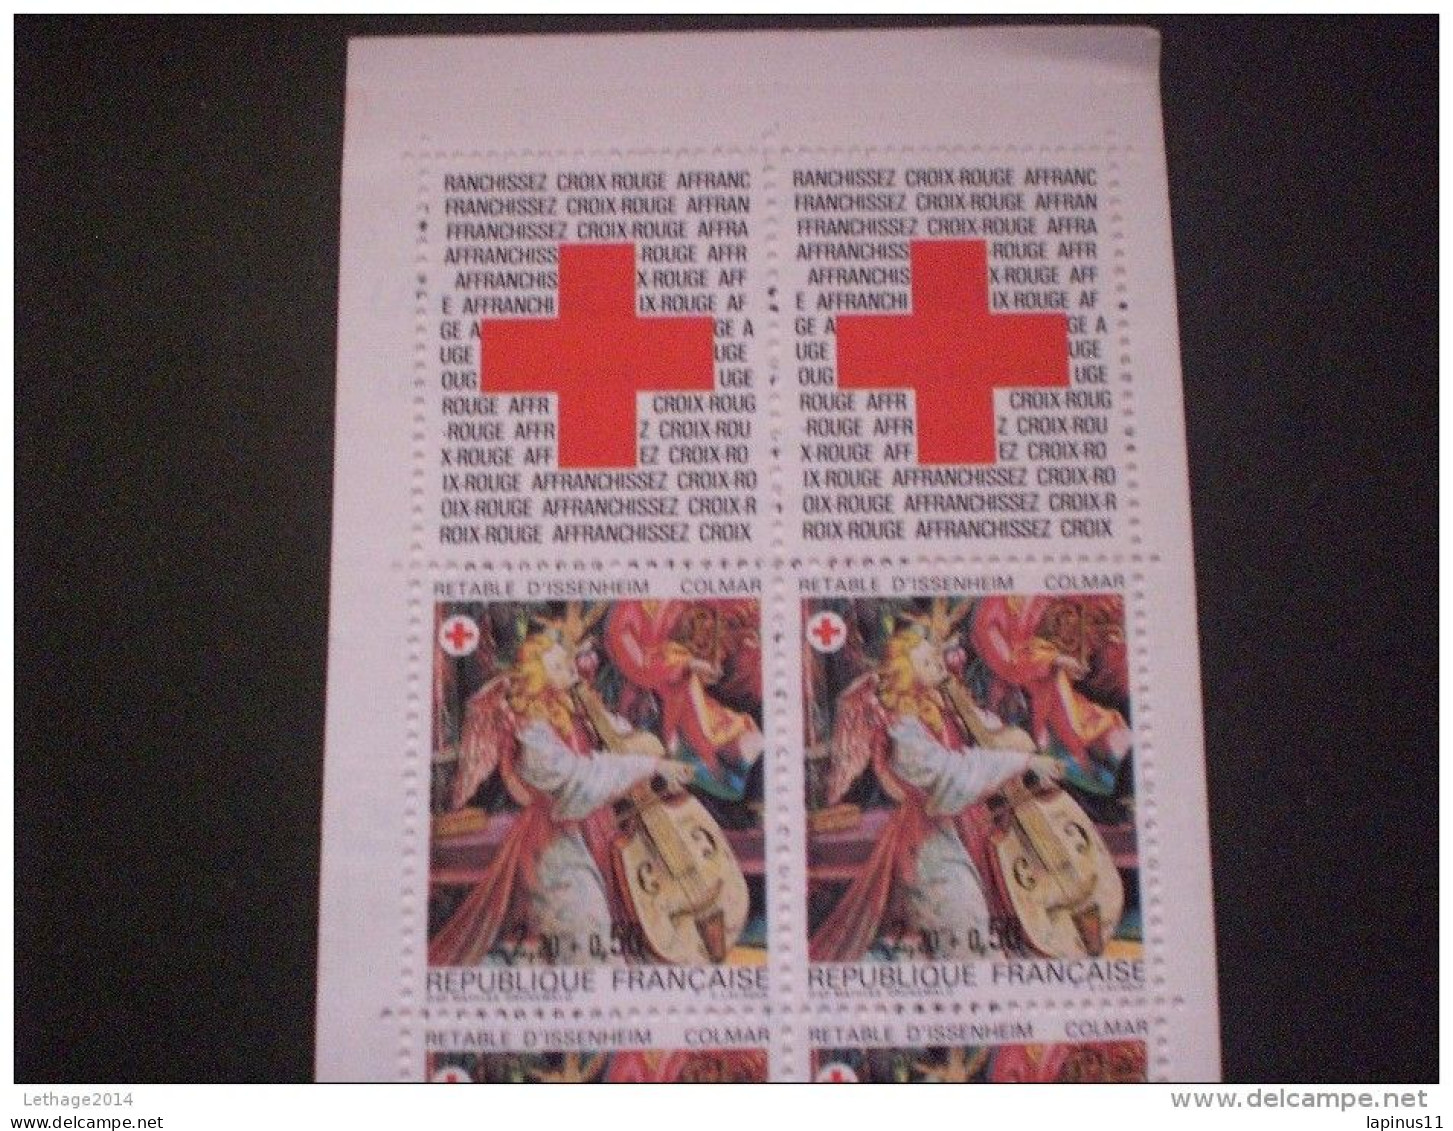 STAMPS FRANCIA CARNETS 1985 RED CROSS - Red Cross